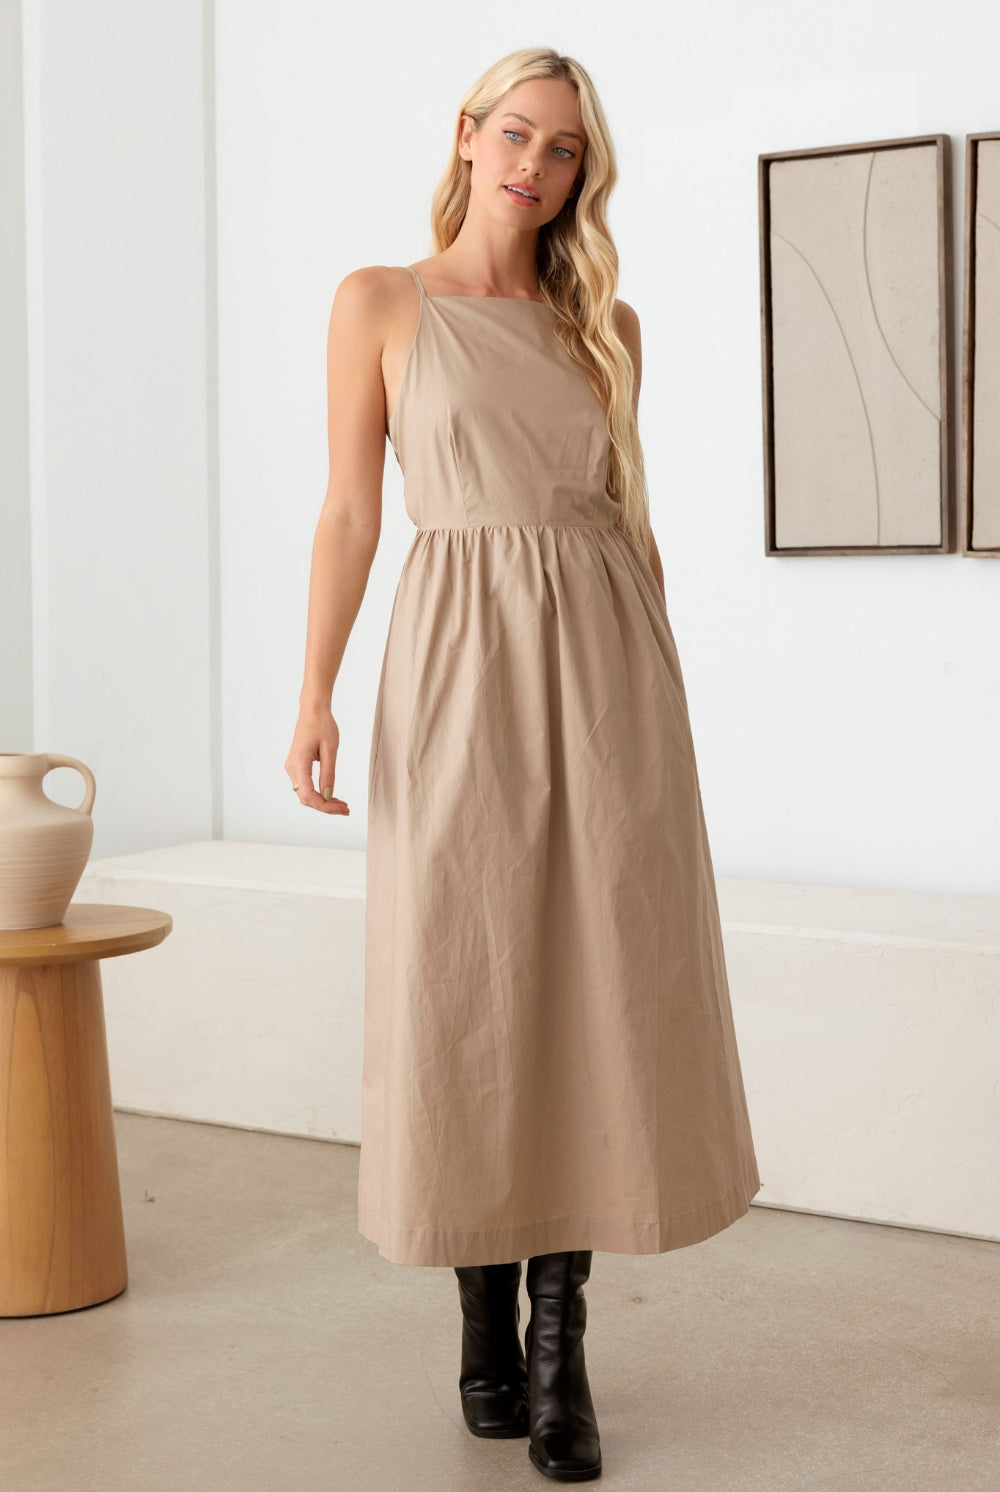 Stylish woman wearing a taupe cami dress with a tie back and open back, perfect for elegant outings.